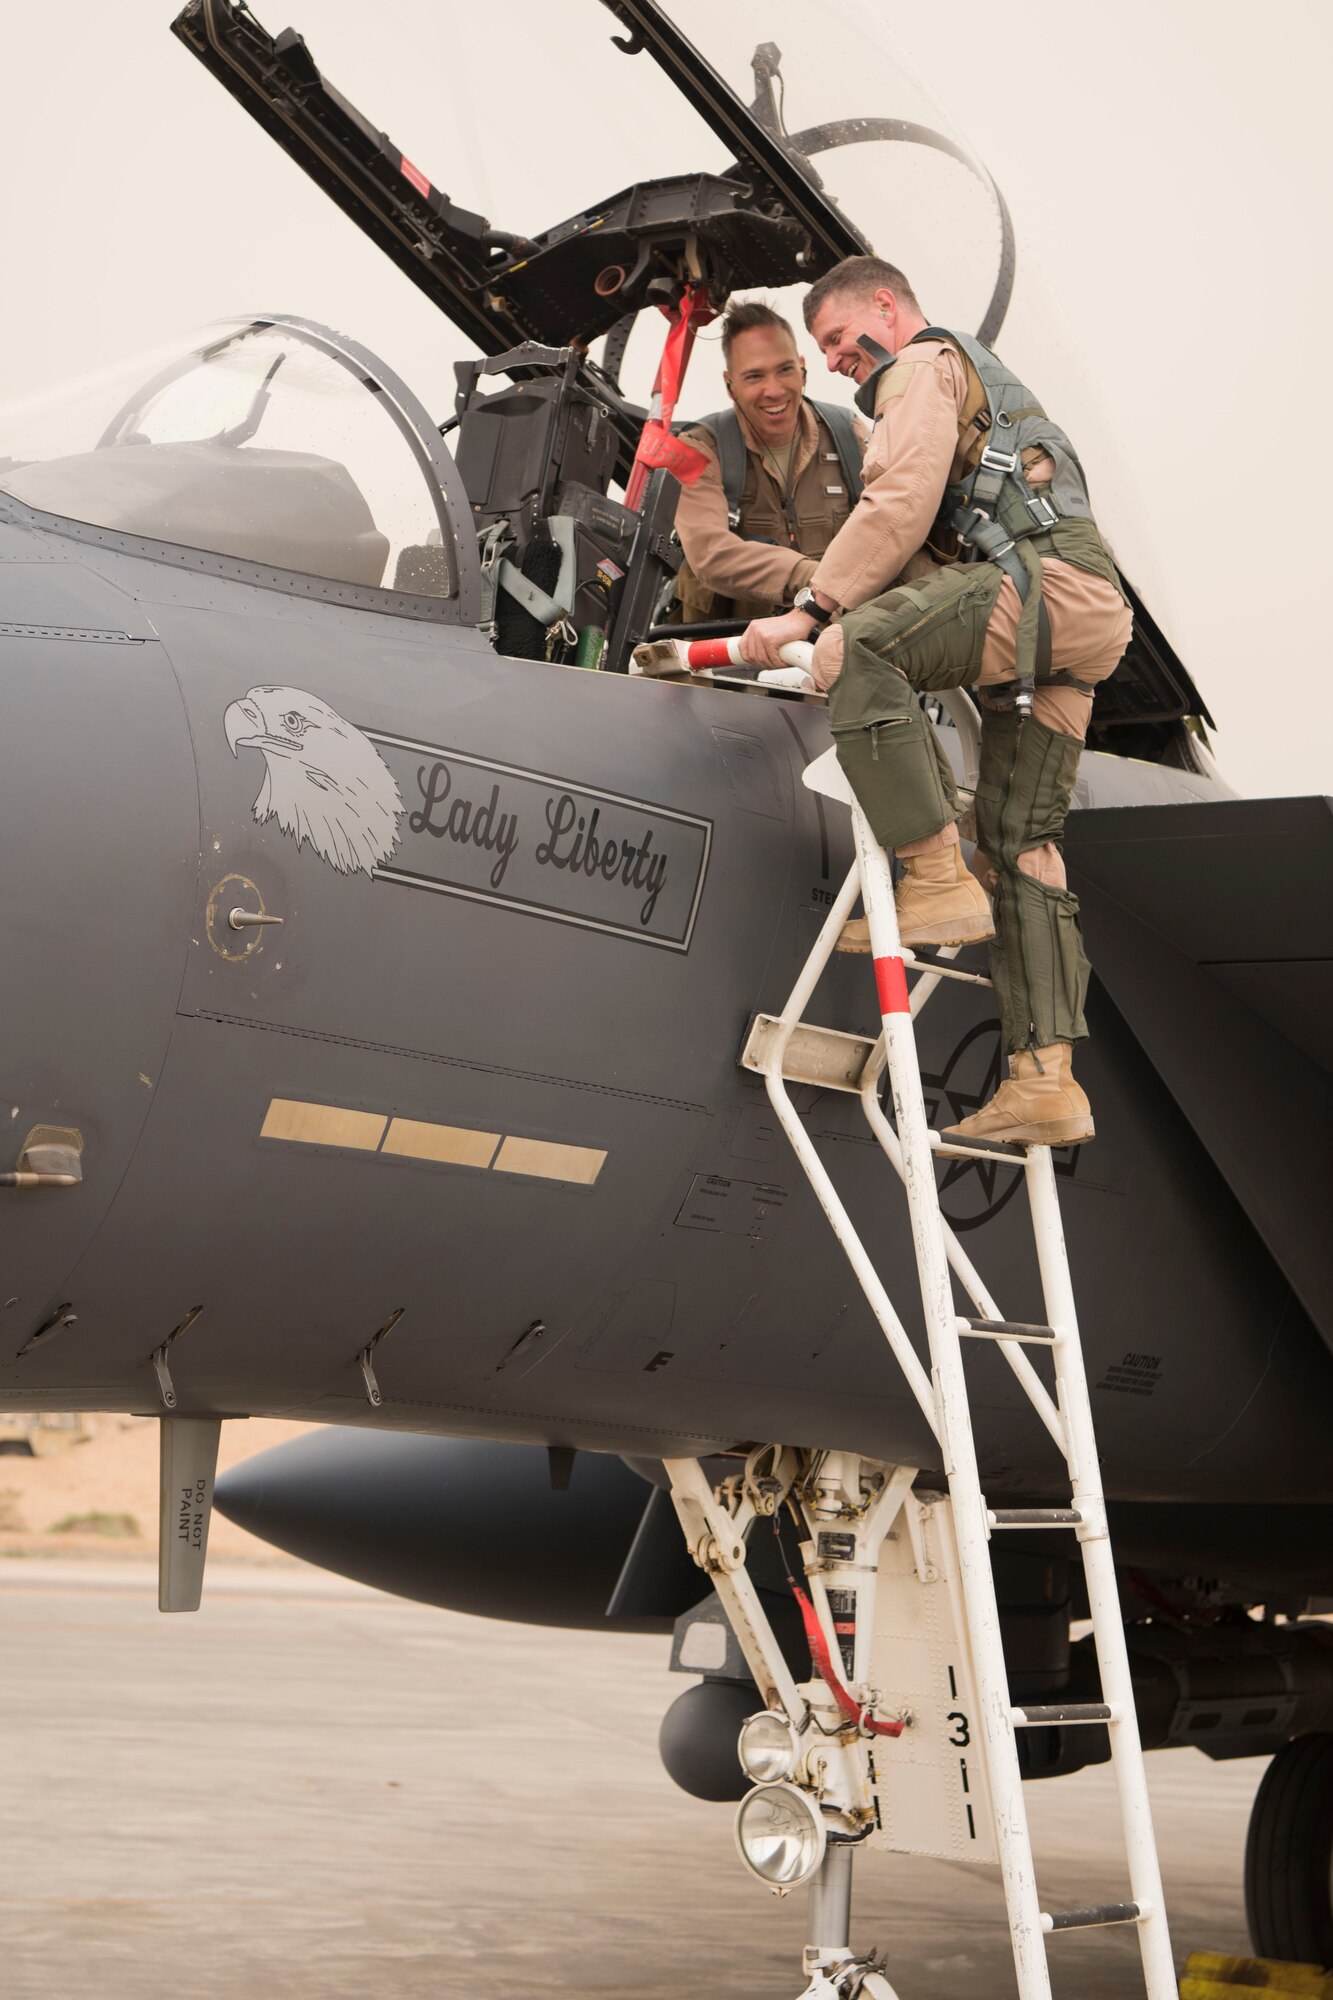 Brig. Gen. Kyle Robinson, 332nd Air Expeditionary Wing commander, disembarks from an F-15E Strike Eagle with Col. Shane Steinke, 332nd AEW vice commander, May 7, 2018, at an undisclosed location in Southwest Asia.